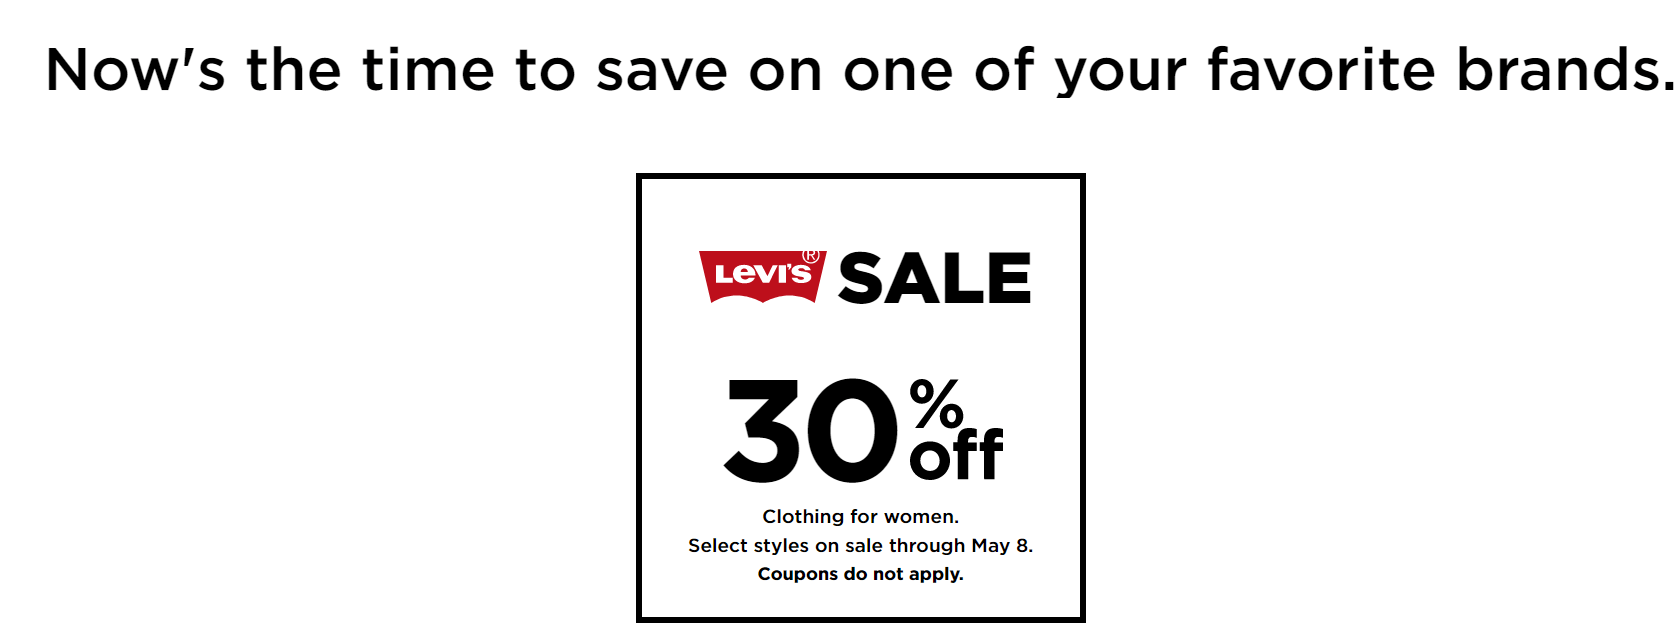 Kohl's Coupon Sale Until May 08, 2022